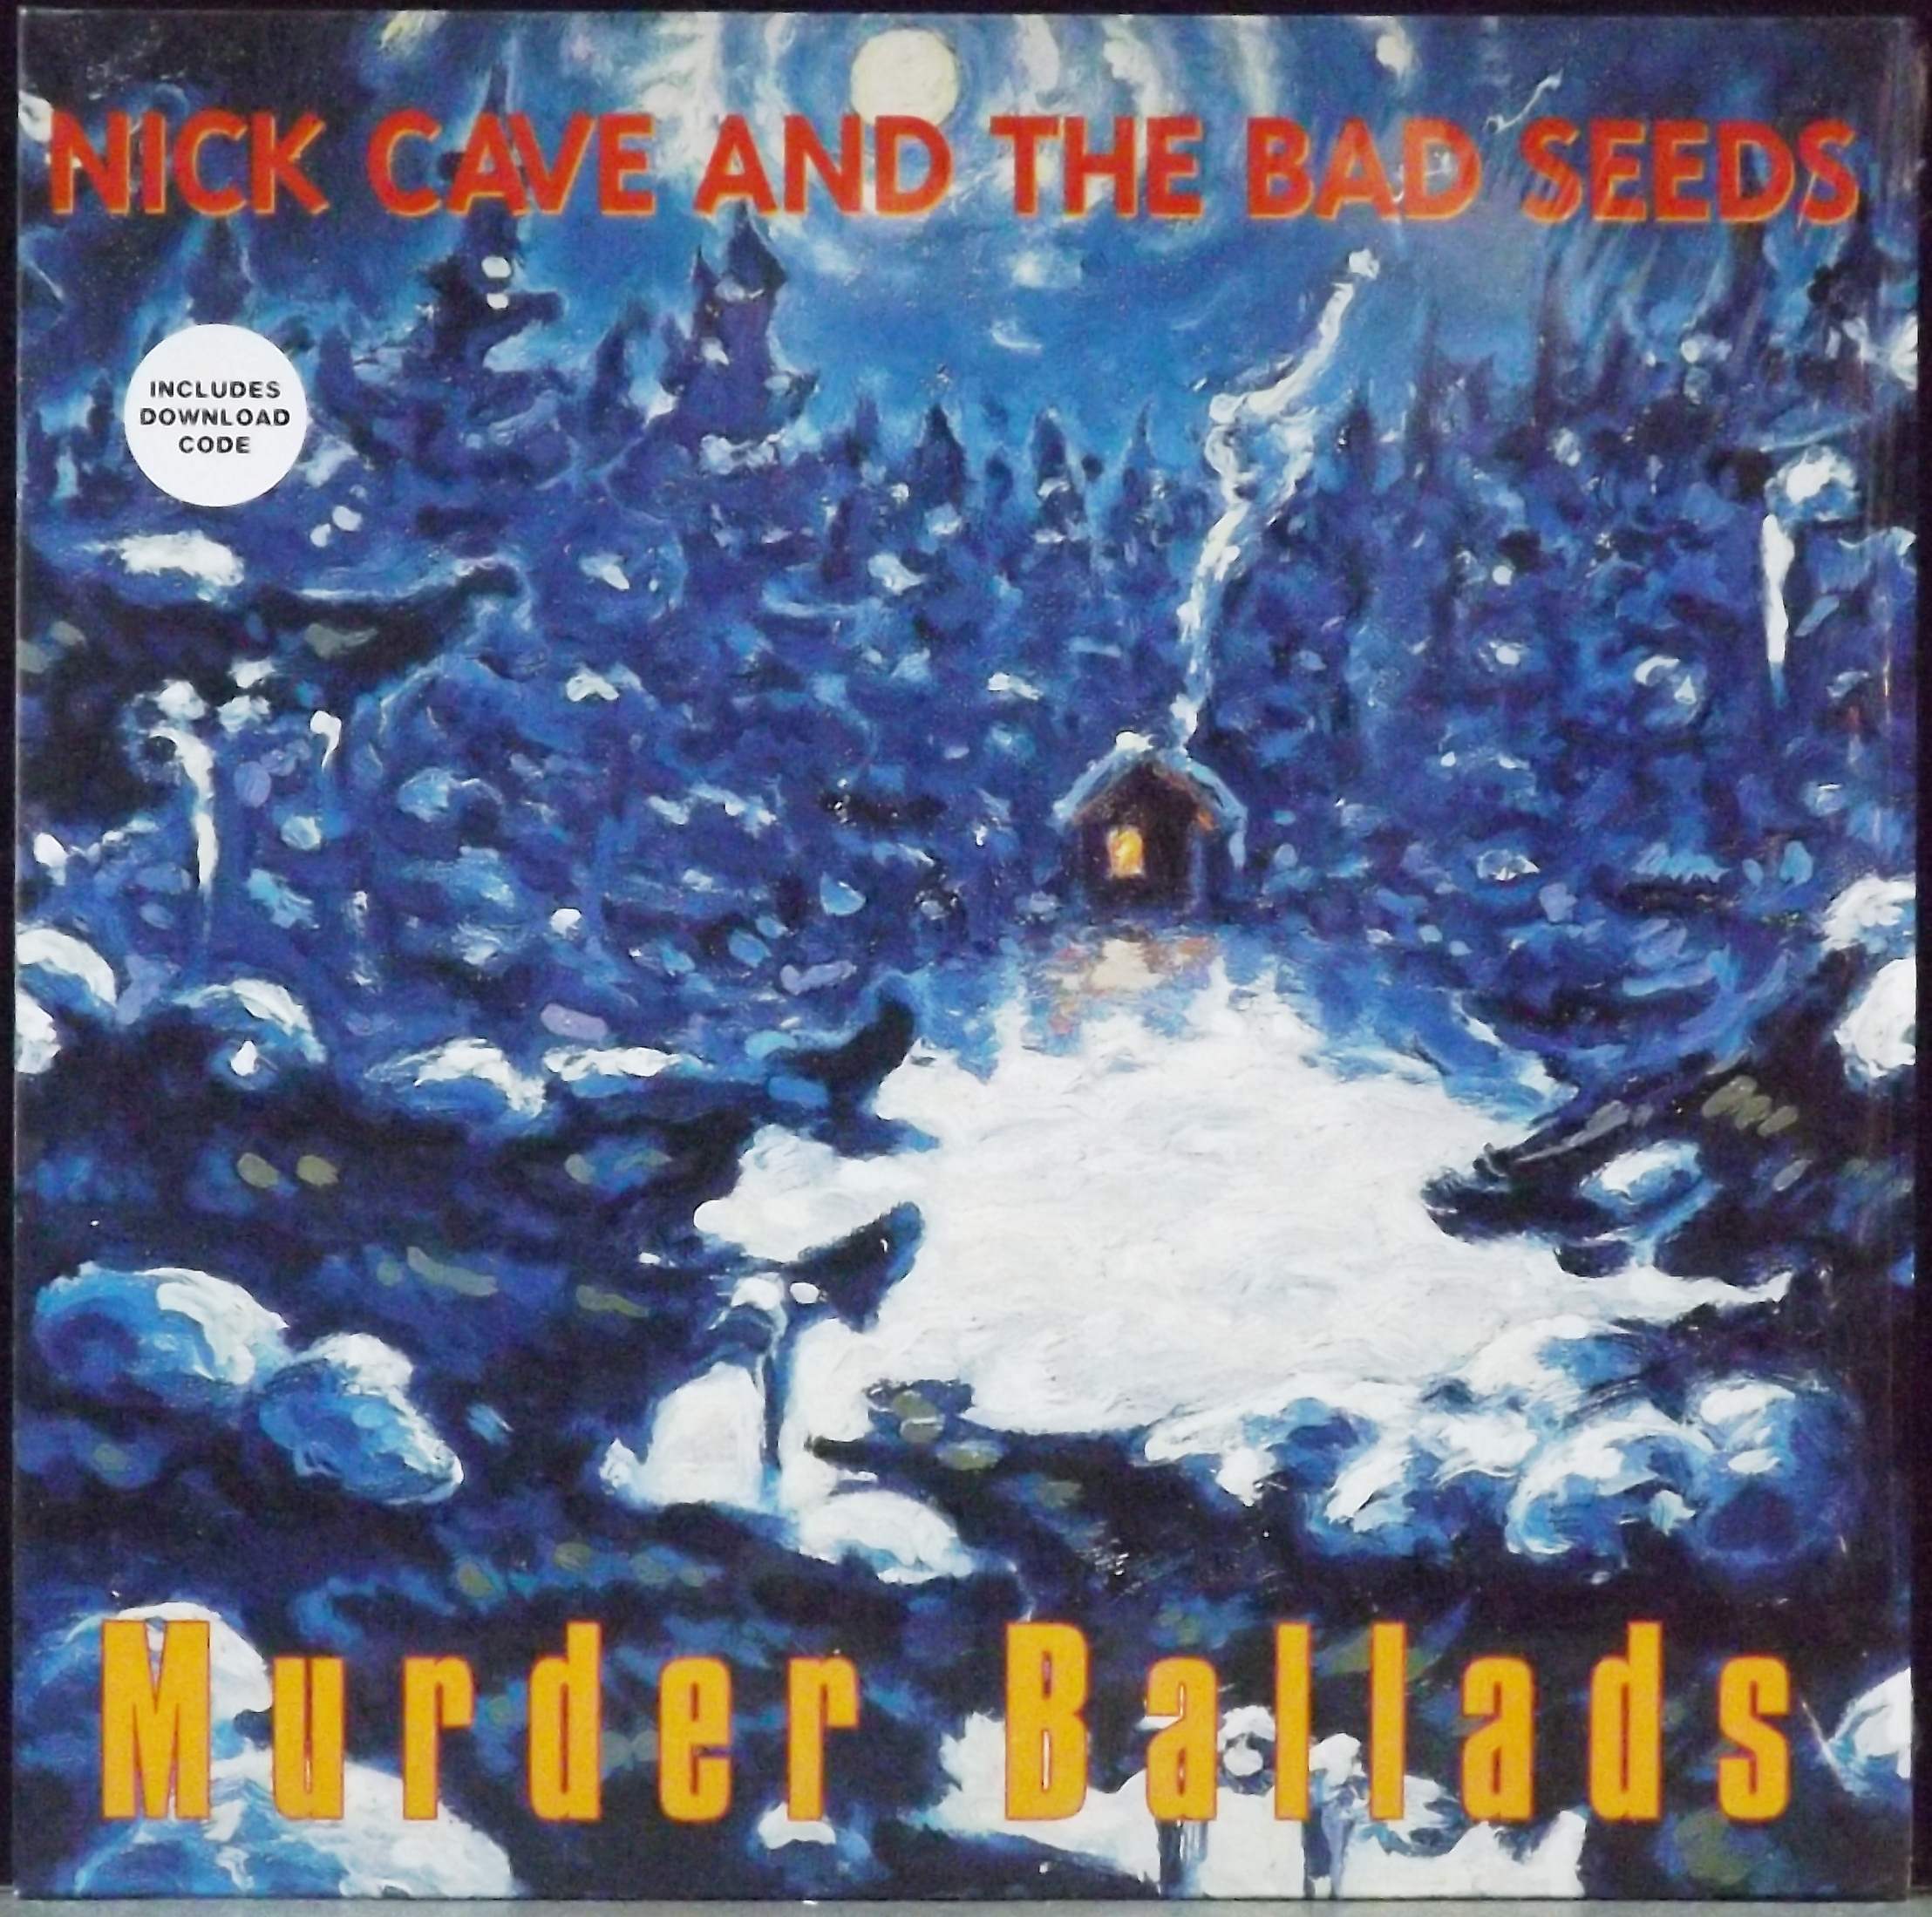 Grow nick. Nick Cave and the Bad Seeds - Murder Ballads (1996). Murder Ballads ник Кейв & the Bad Seeds. Cave Nick "Murder Ballads". Nick Cave and the Bad Seeds Murder Ballads обложка.